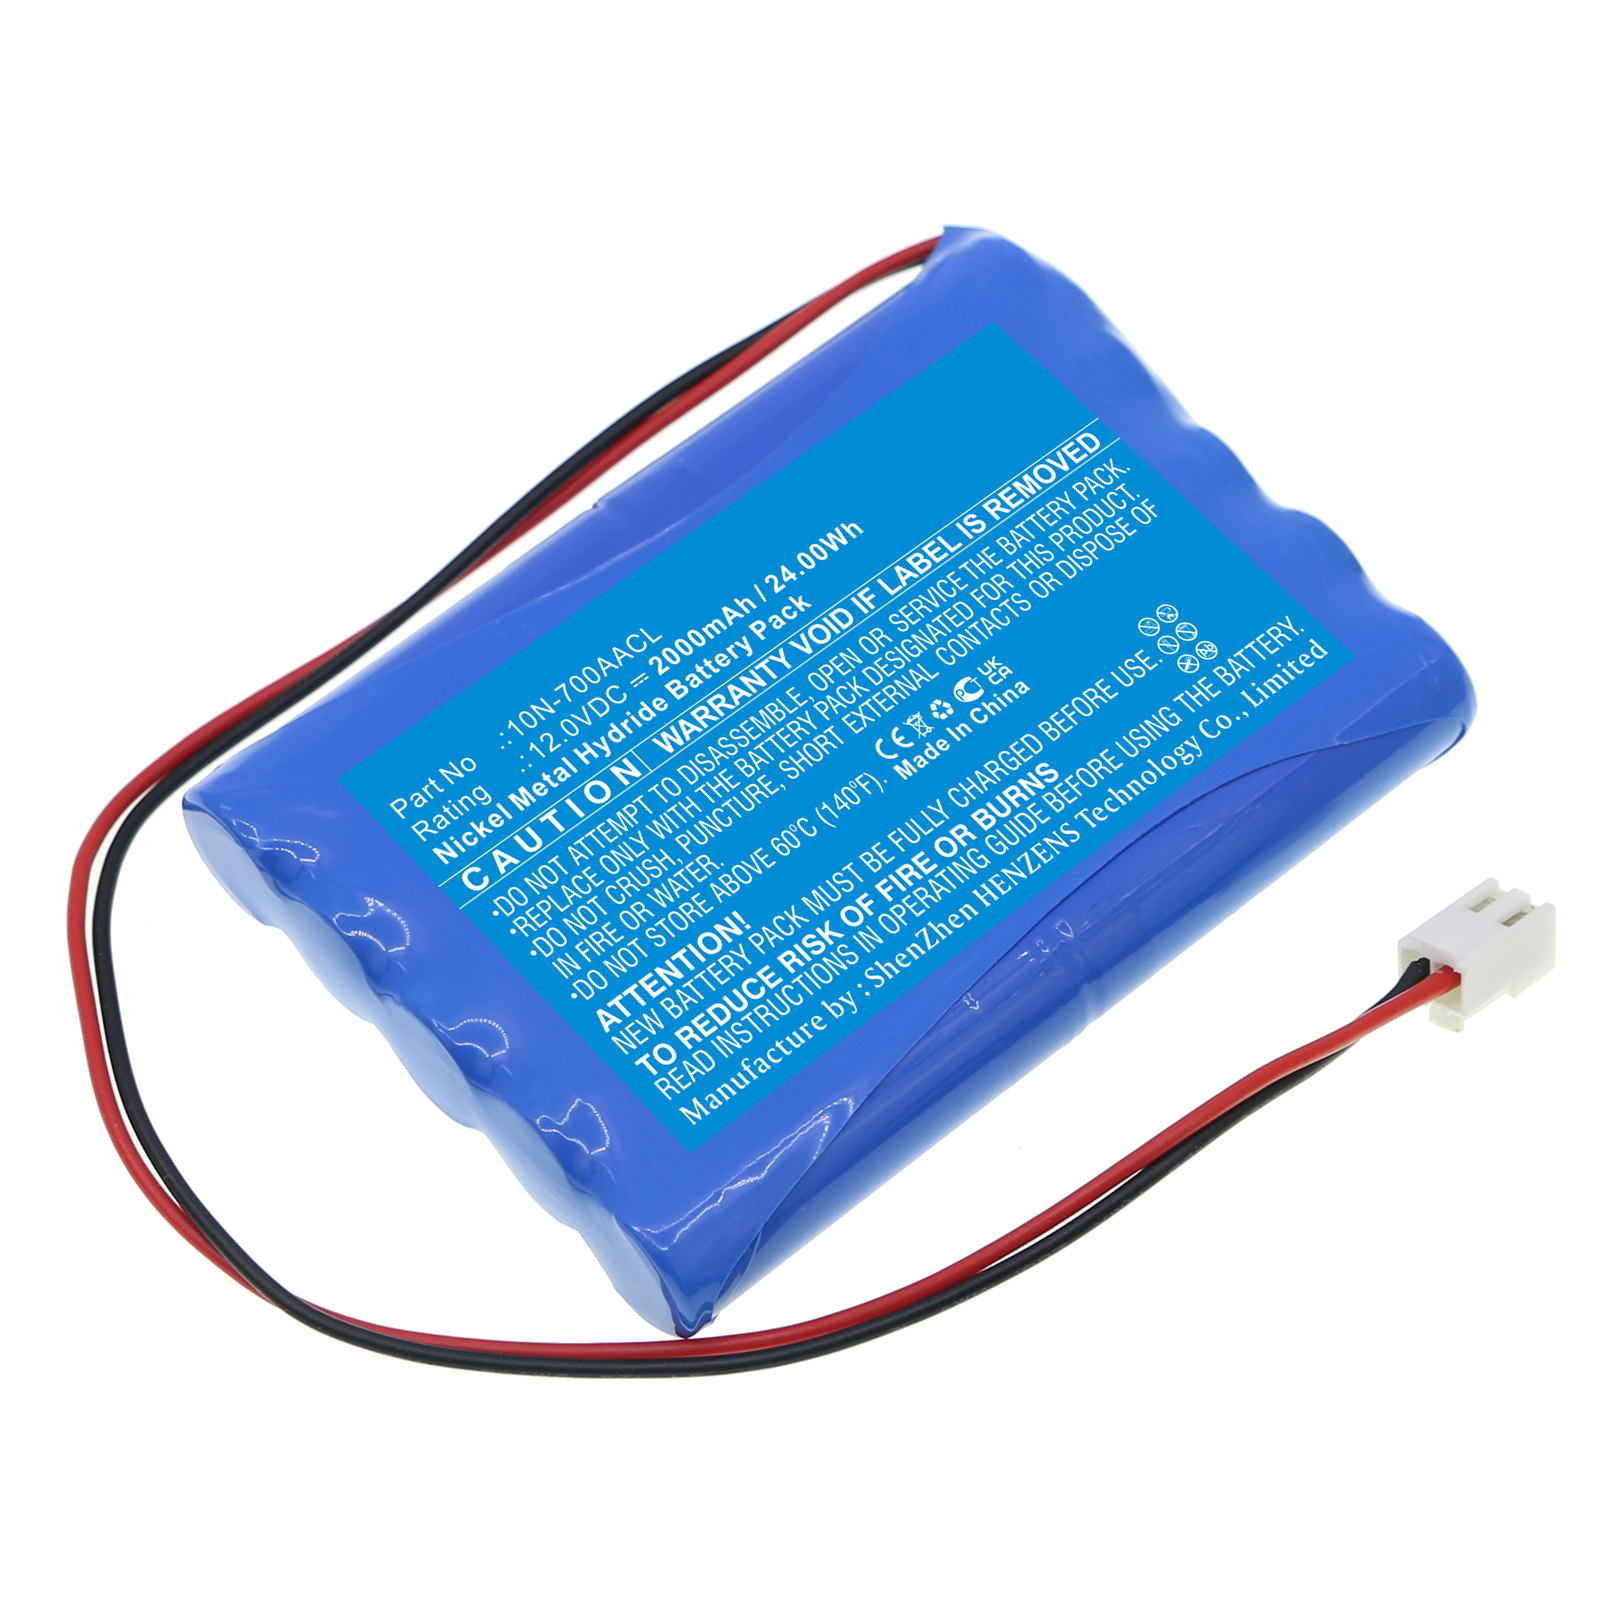 Synergy Digital Medical Battery, Compatible with Nipro 10N-700AACL Medical Battery (Ni-MH, 12V, 2000mAh)